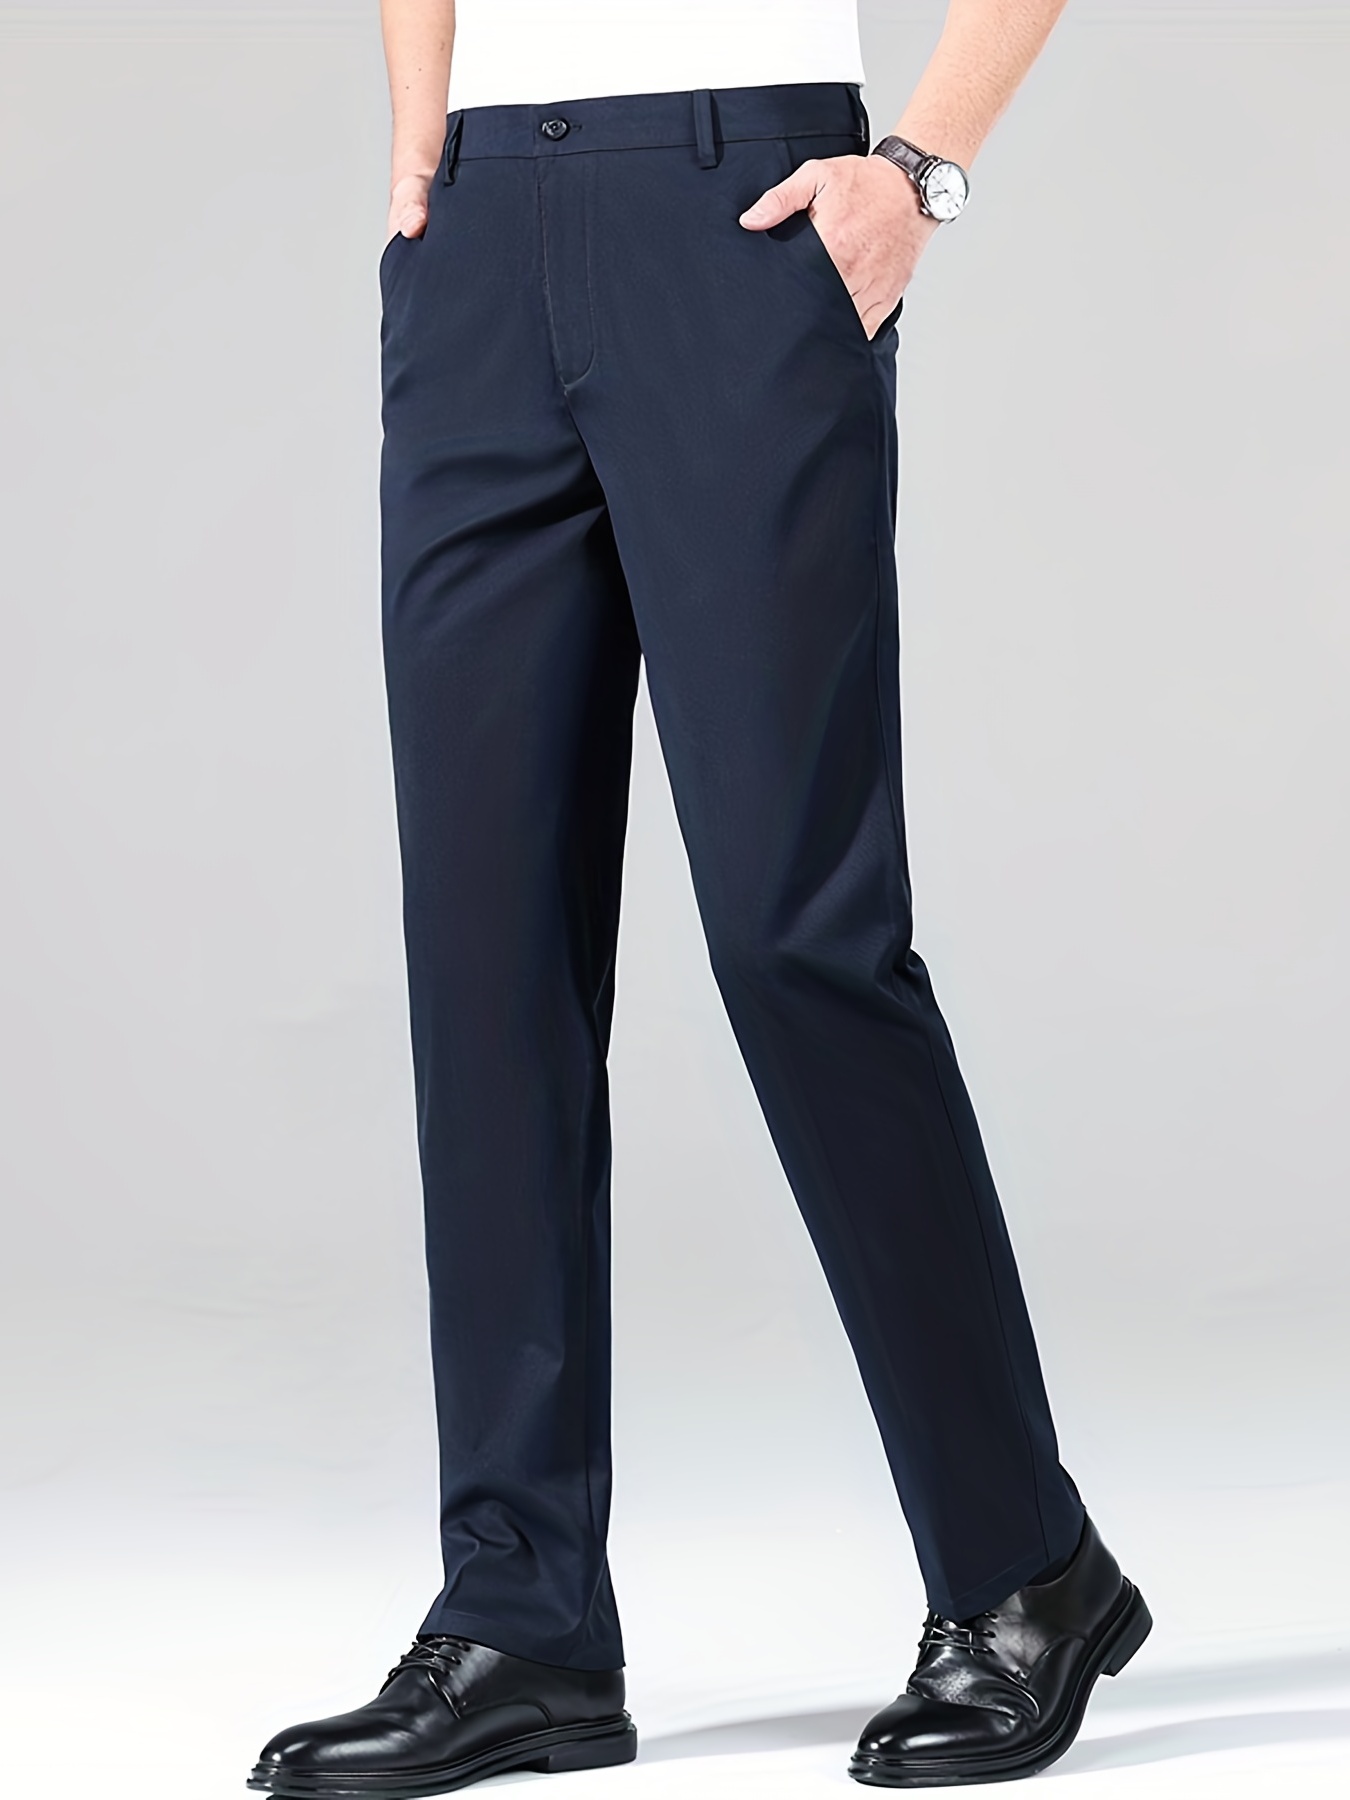 Straight suit trousers